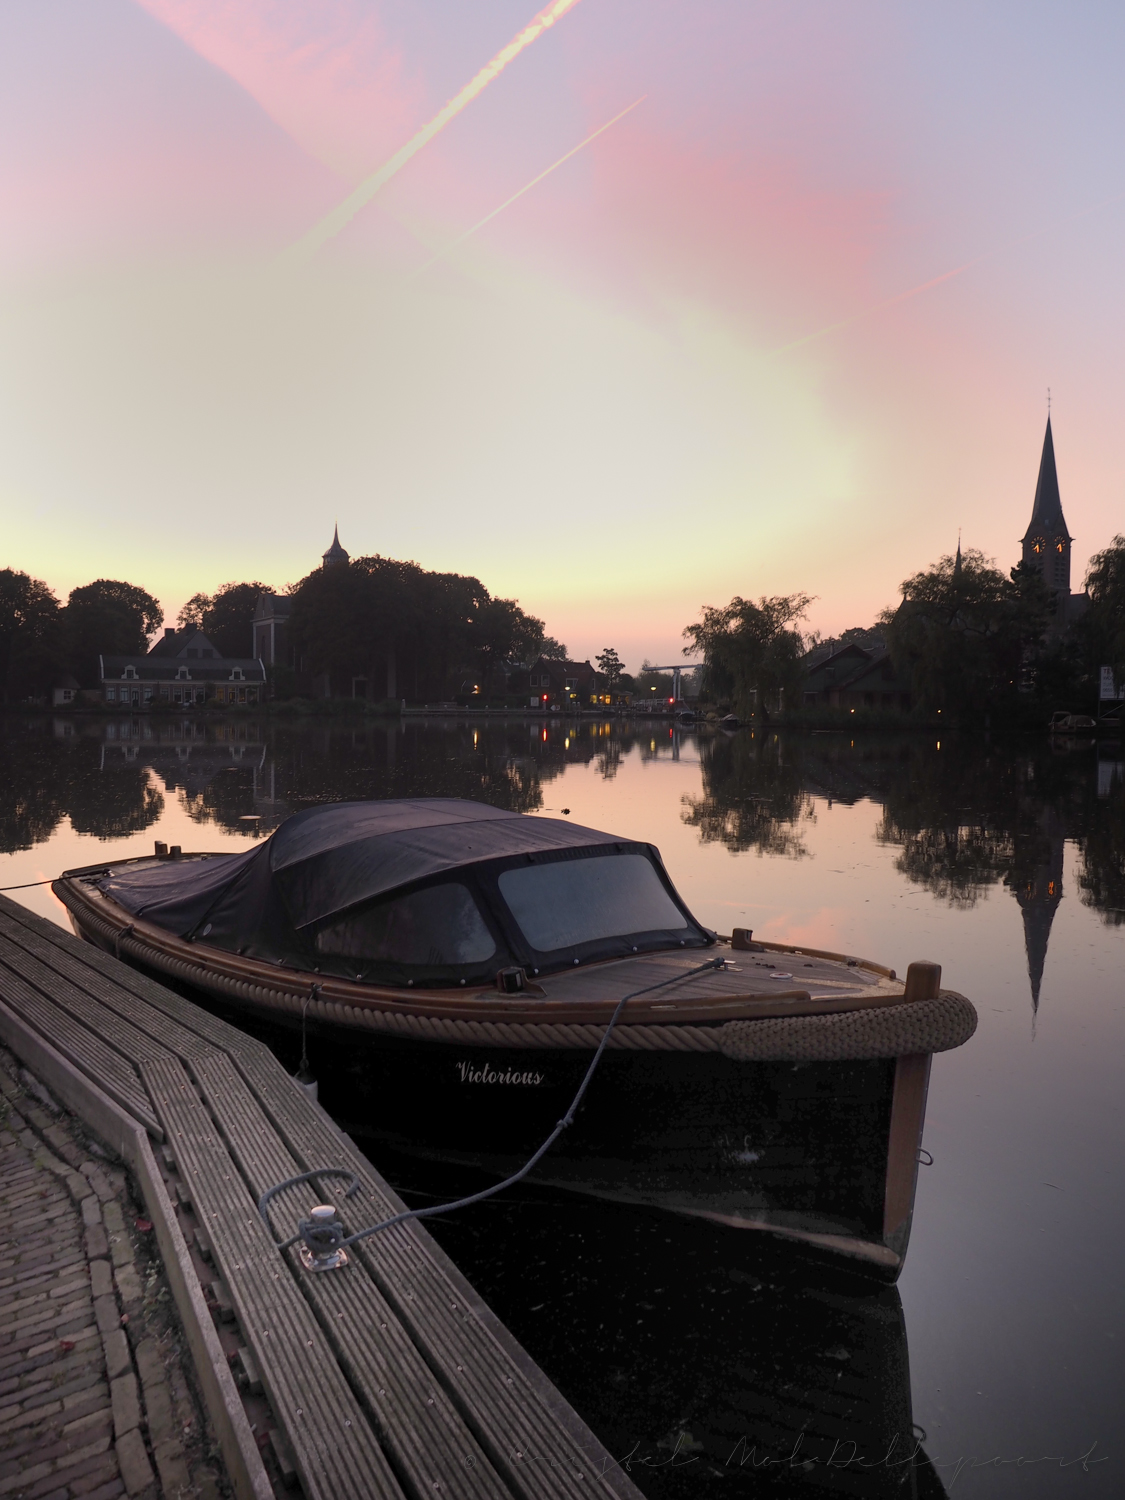 Morning on the Amstel